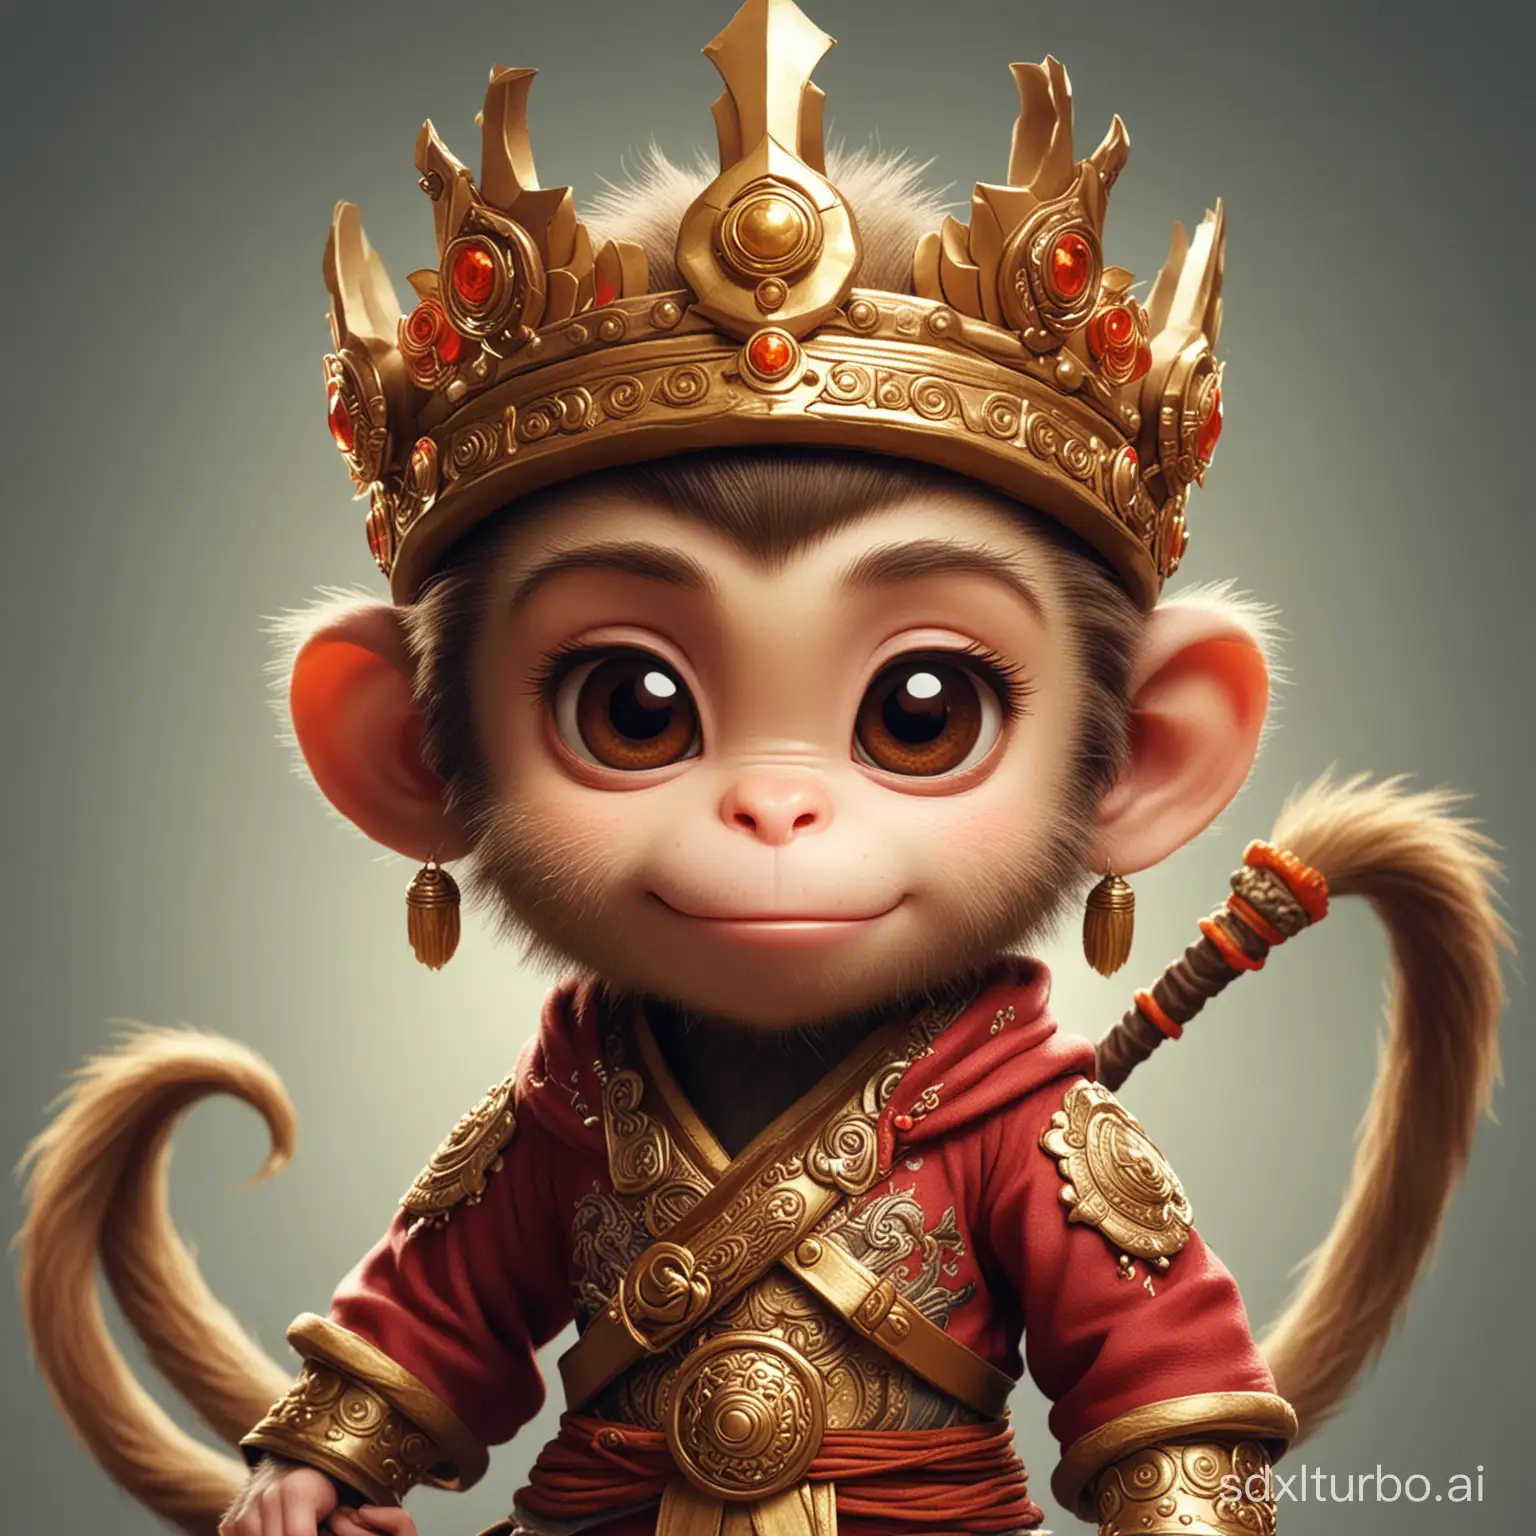 Adorable-Monkey-King-Wearing-Ornate-Crown-and-Holding-Royal-Scepter